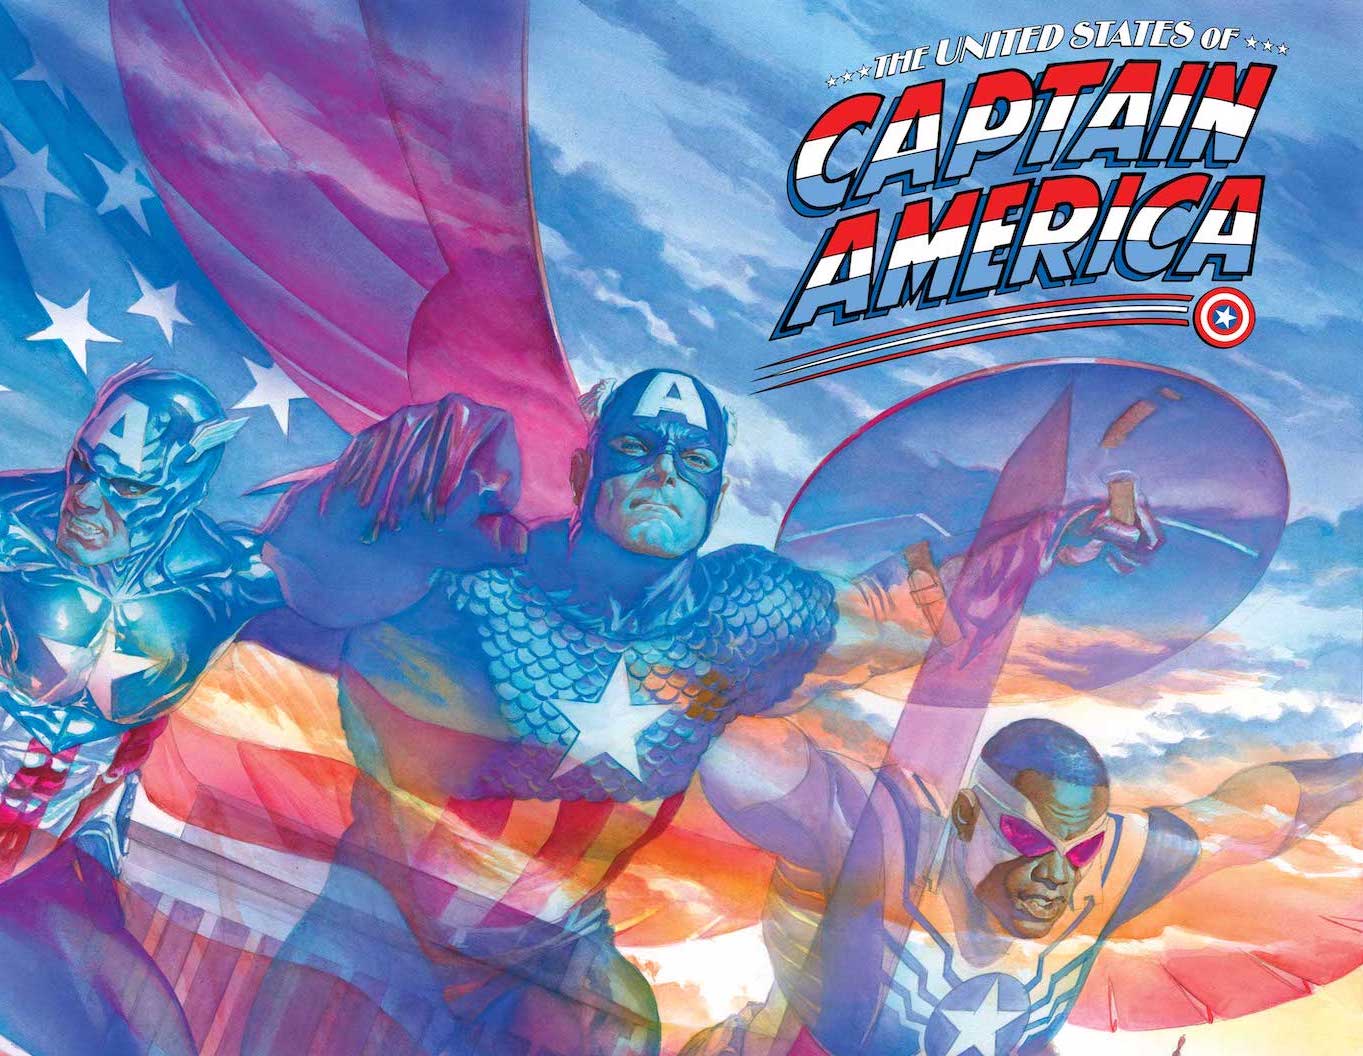 Marvel to celebrate Captain America with 'The United States of Captain America'